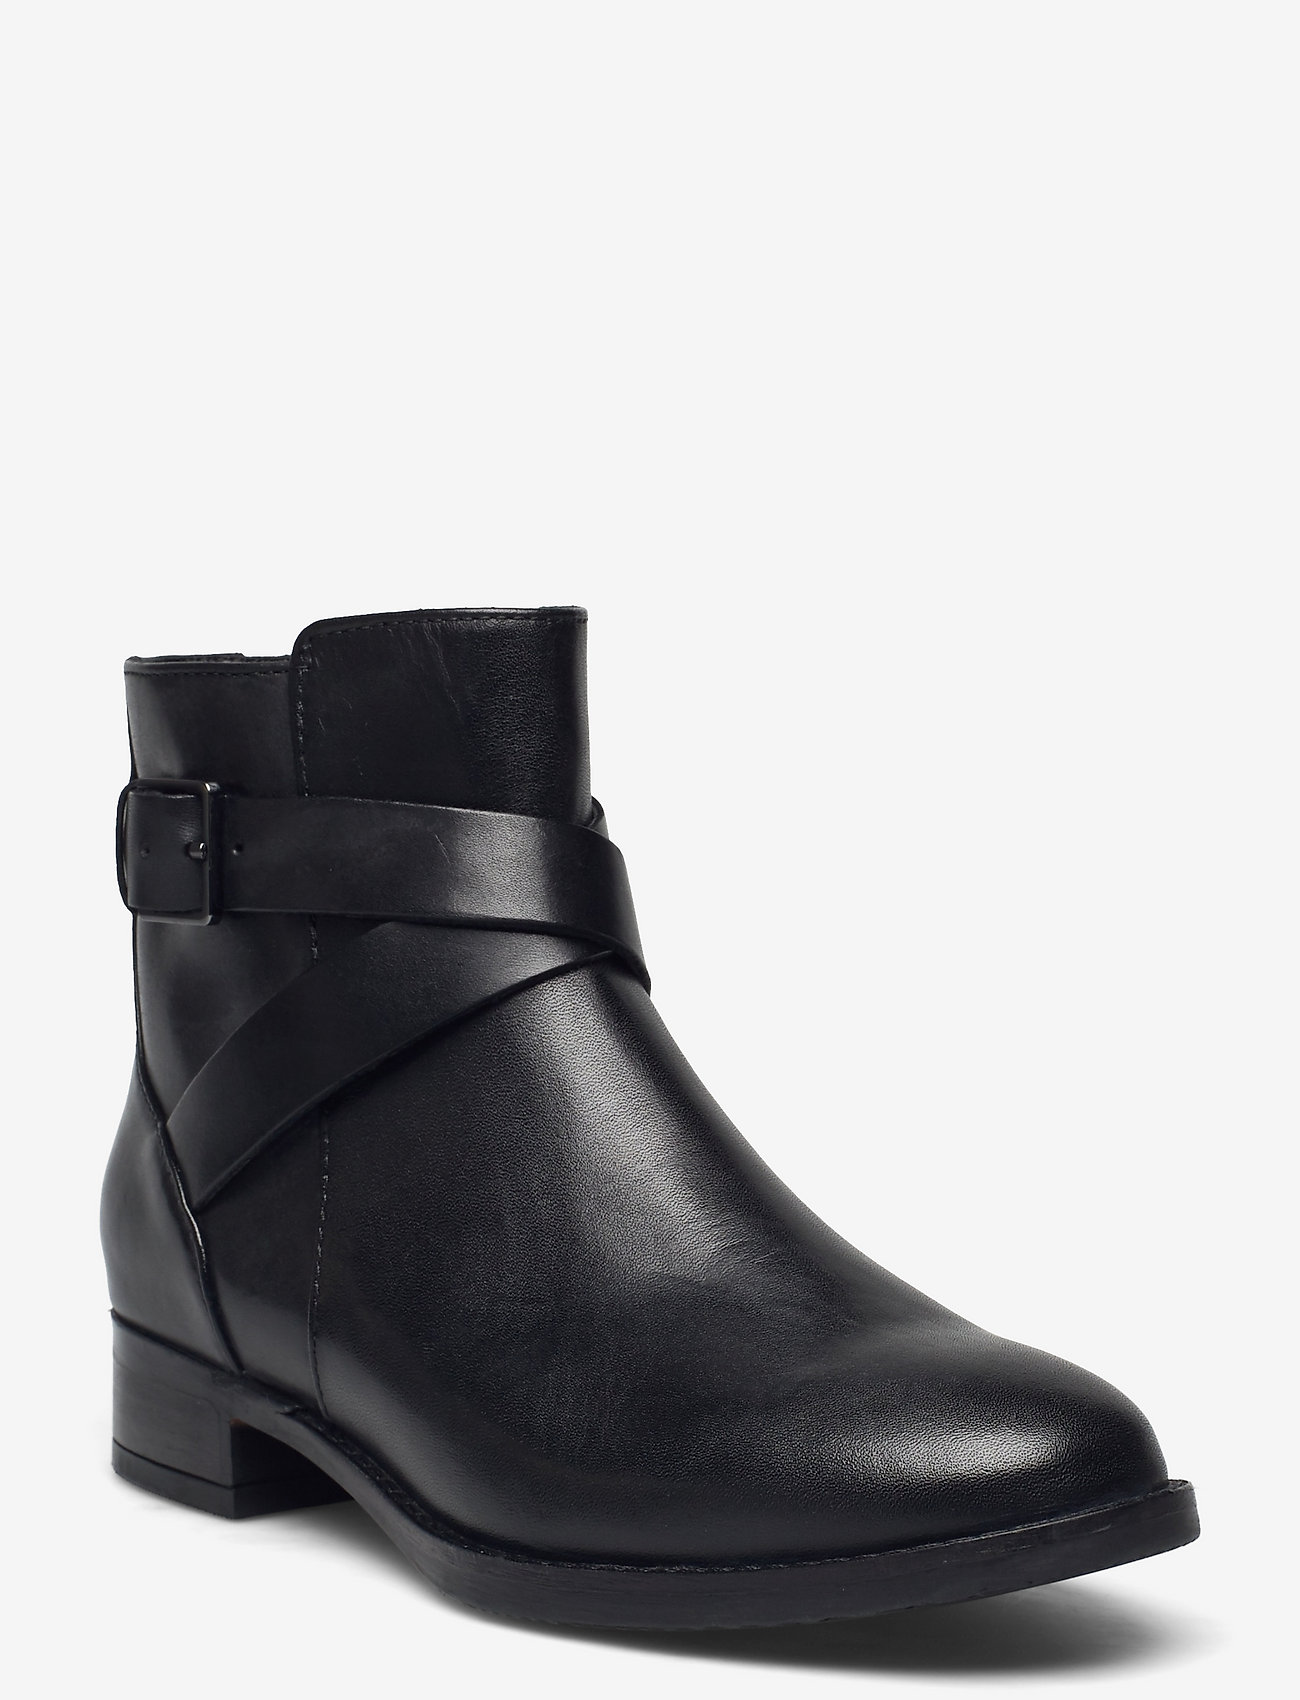 Clarks - Hamble Buckle - flat ankle boots - black leather - 0